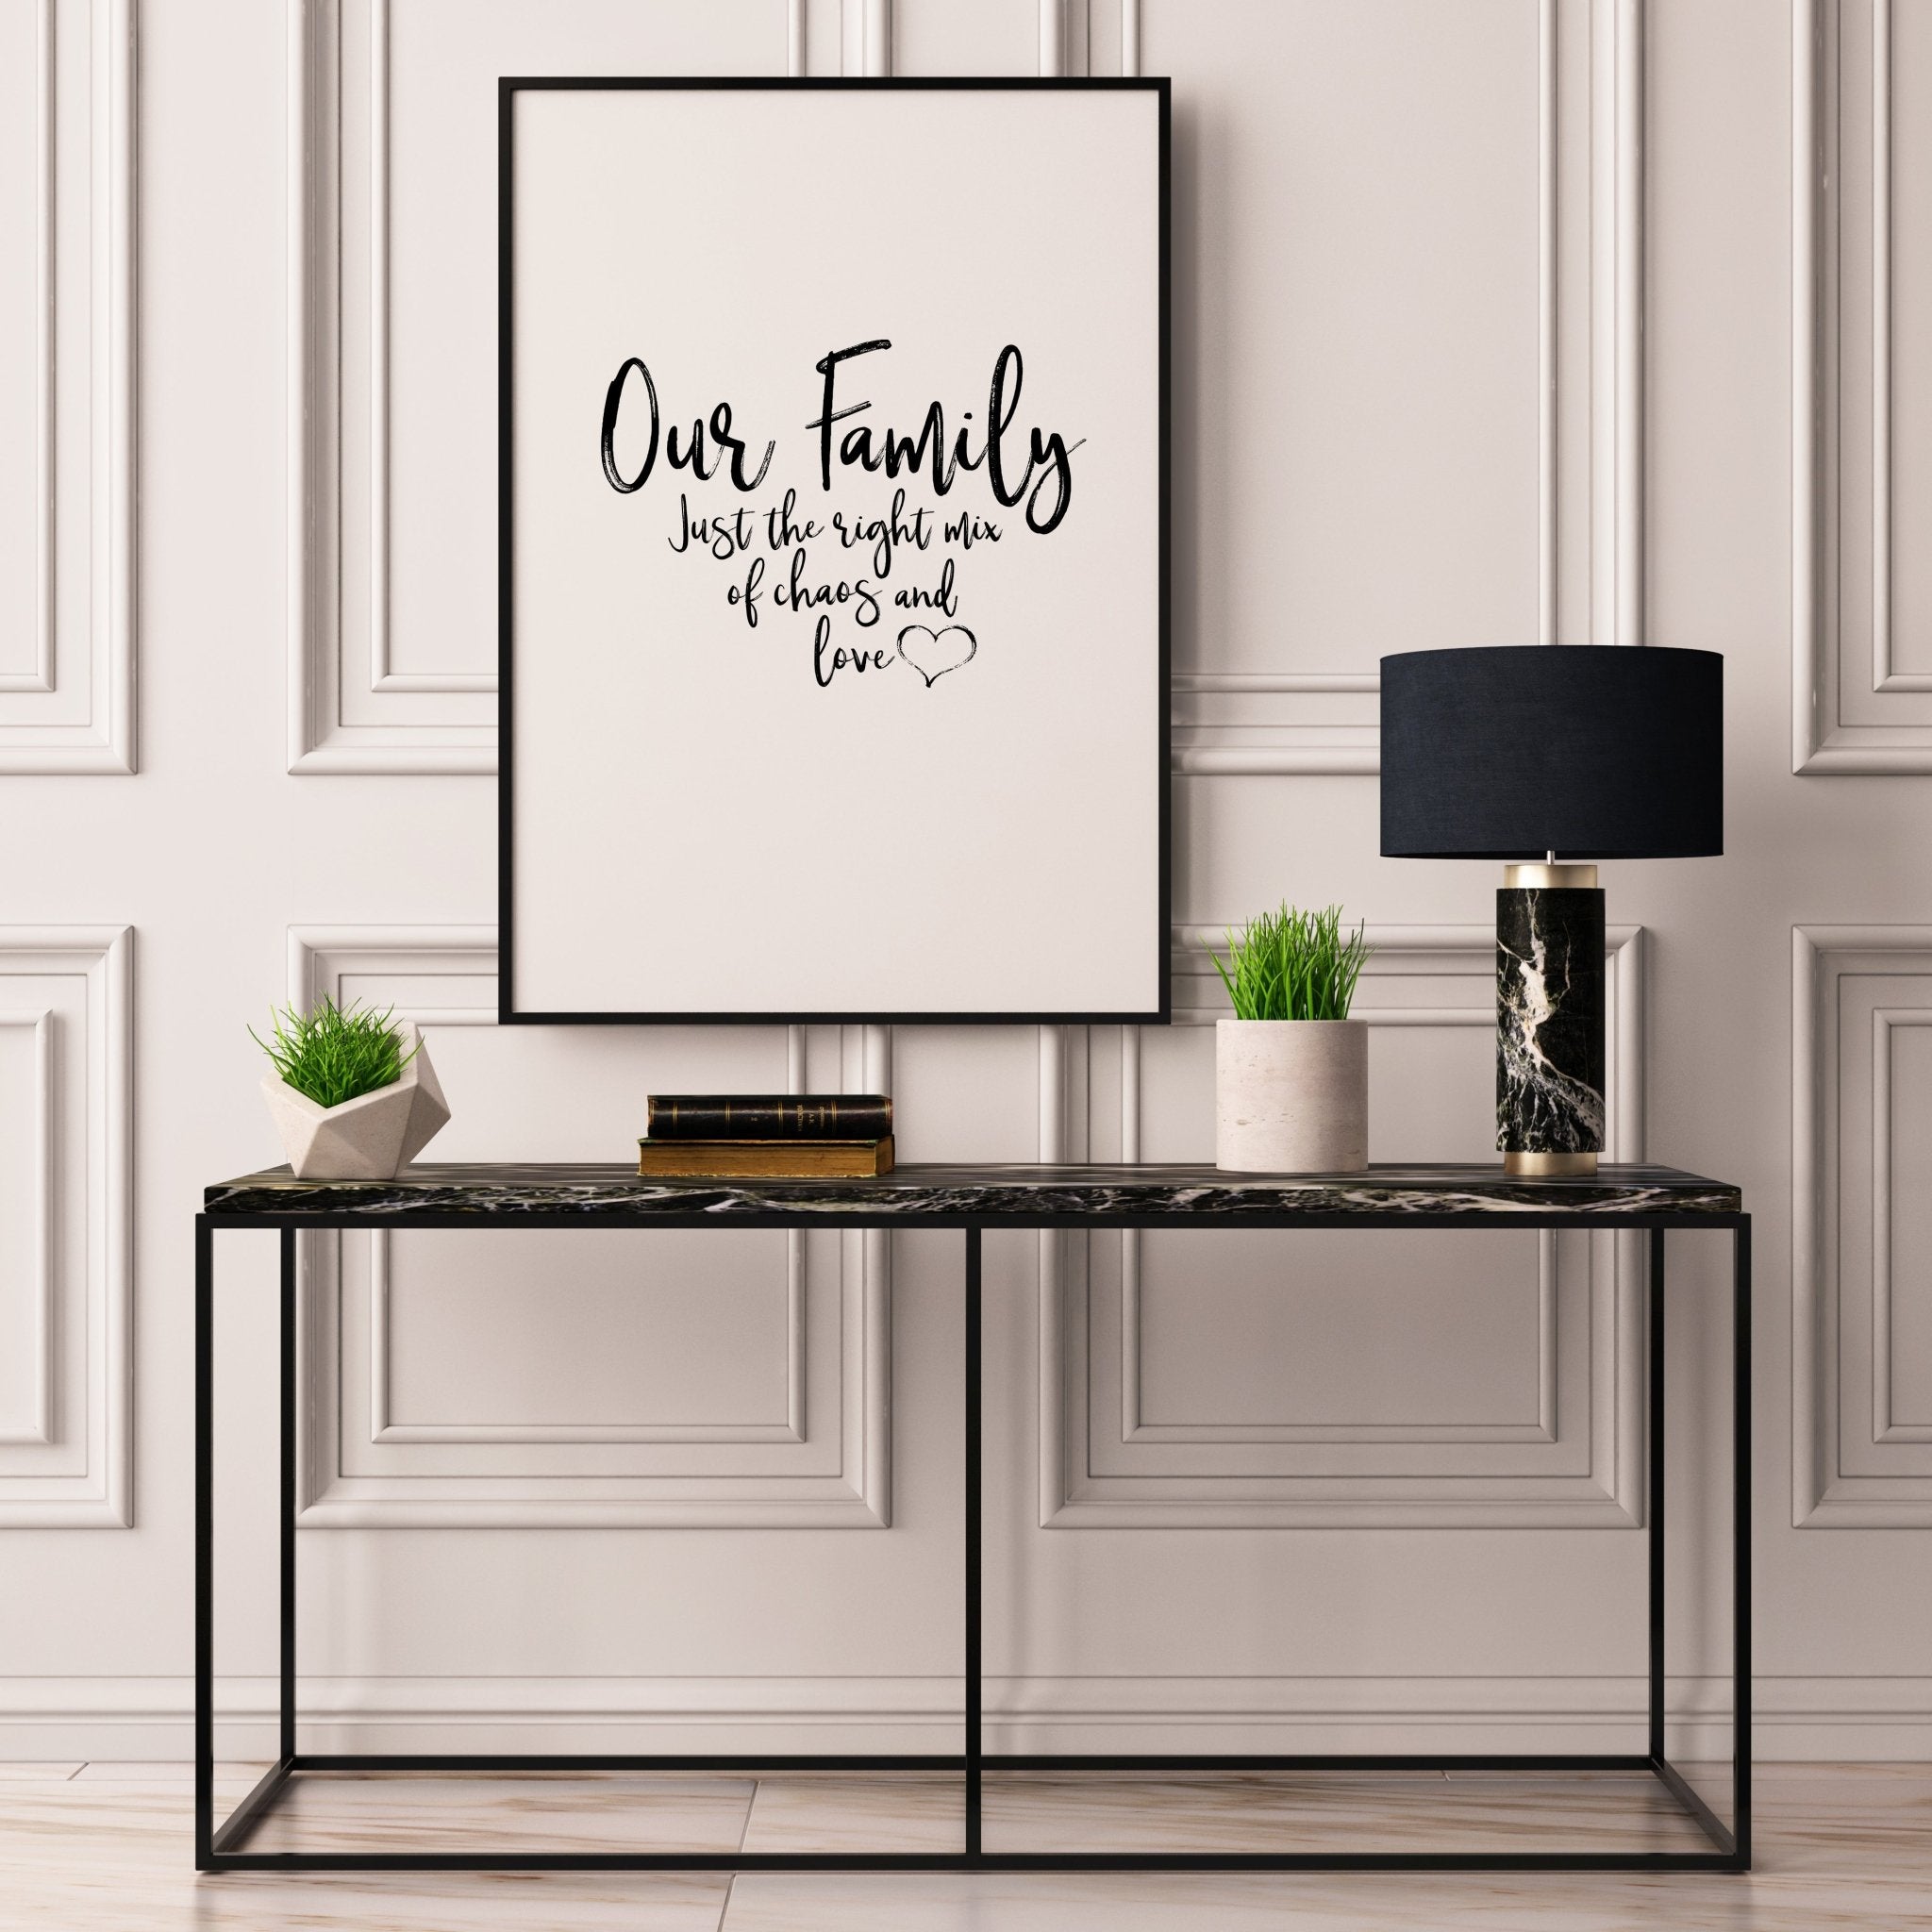 Our Family The Right Mix Of Chaos and Love - D'Luxe Prints